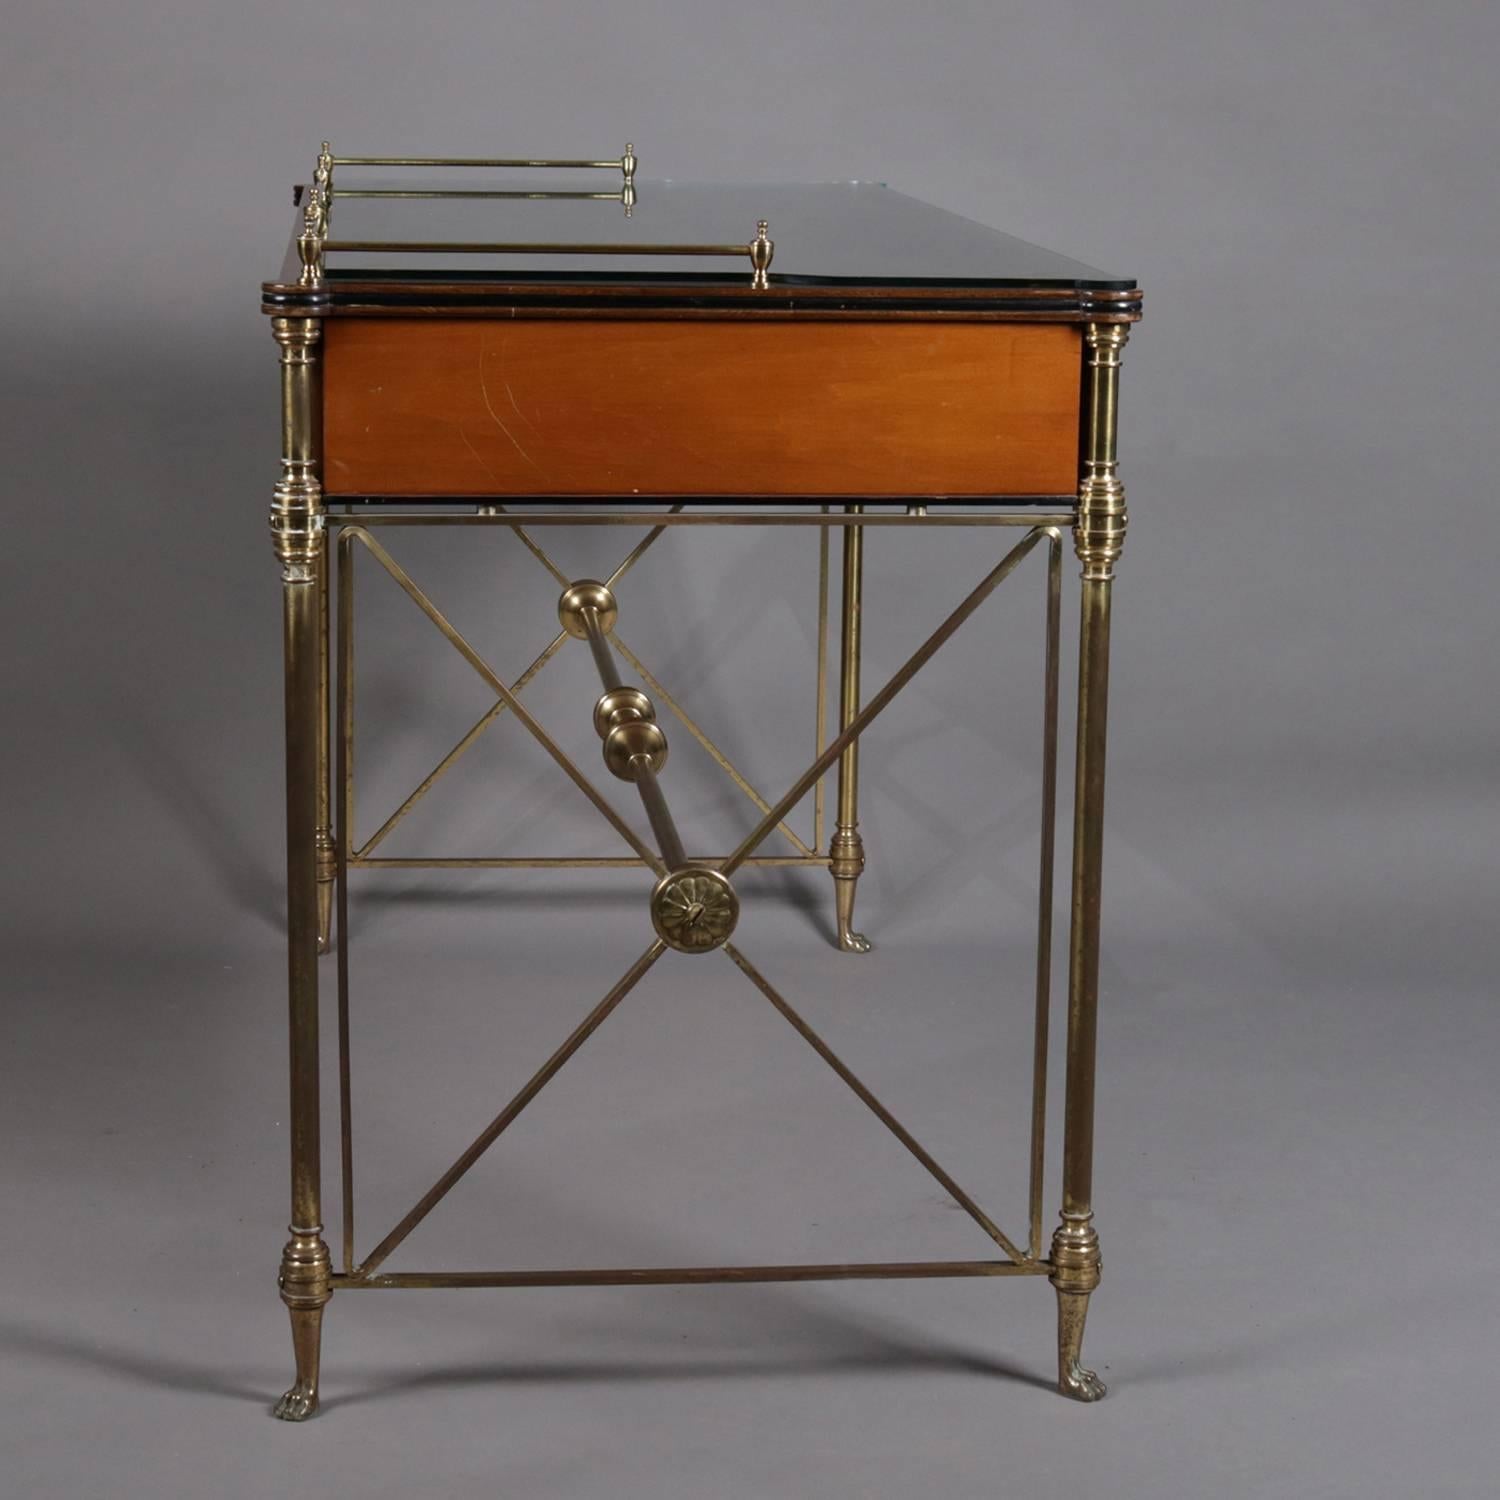 Hollywood Regency Neoclassical Kittinger Satinwood, Brass and Glass Writing Desk, 20th Century